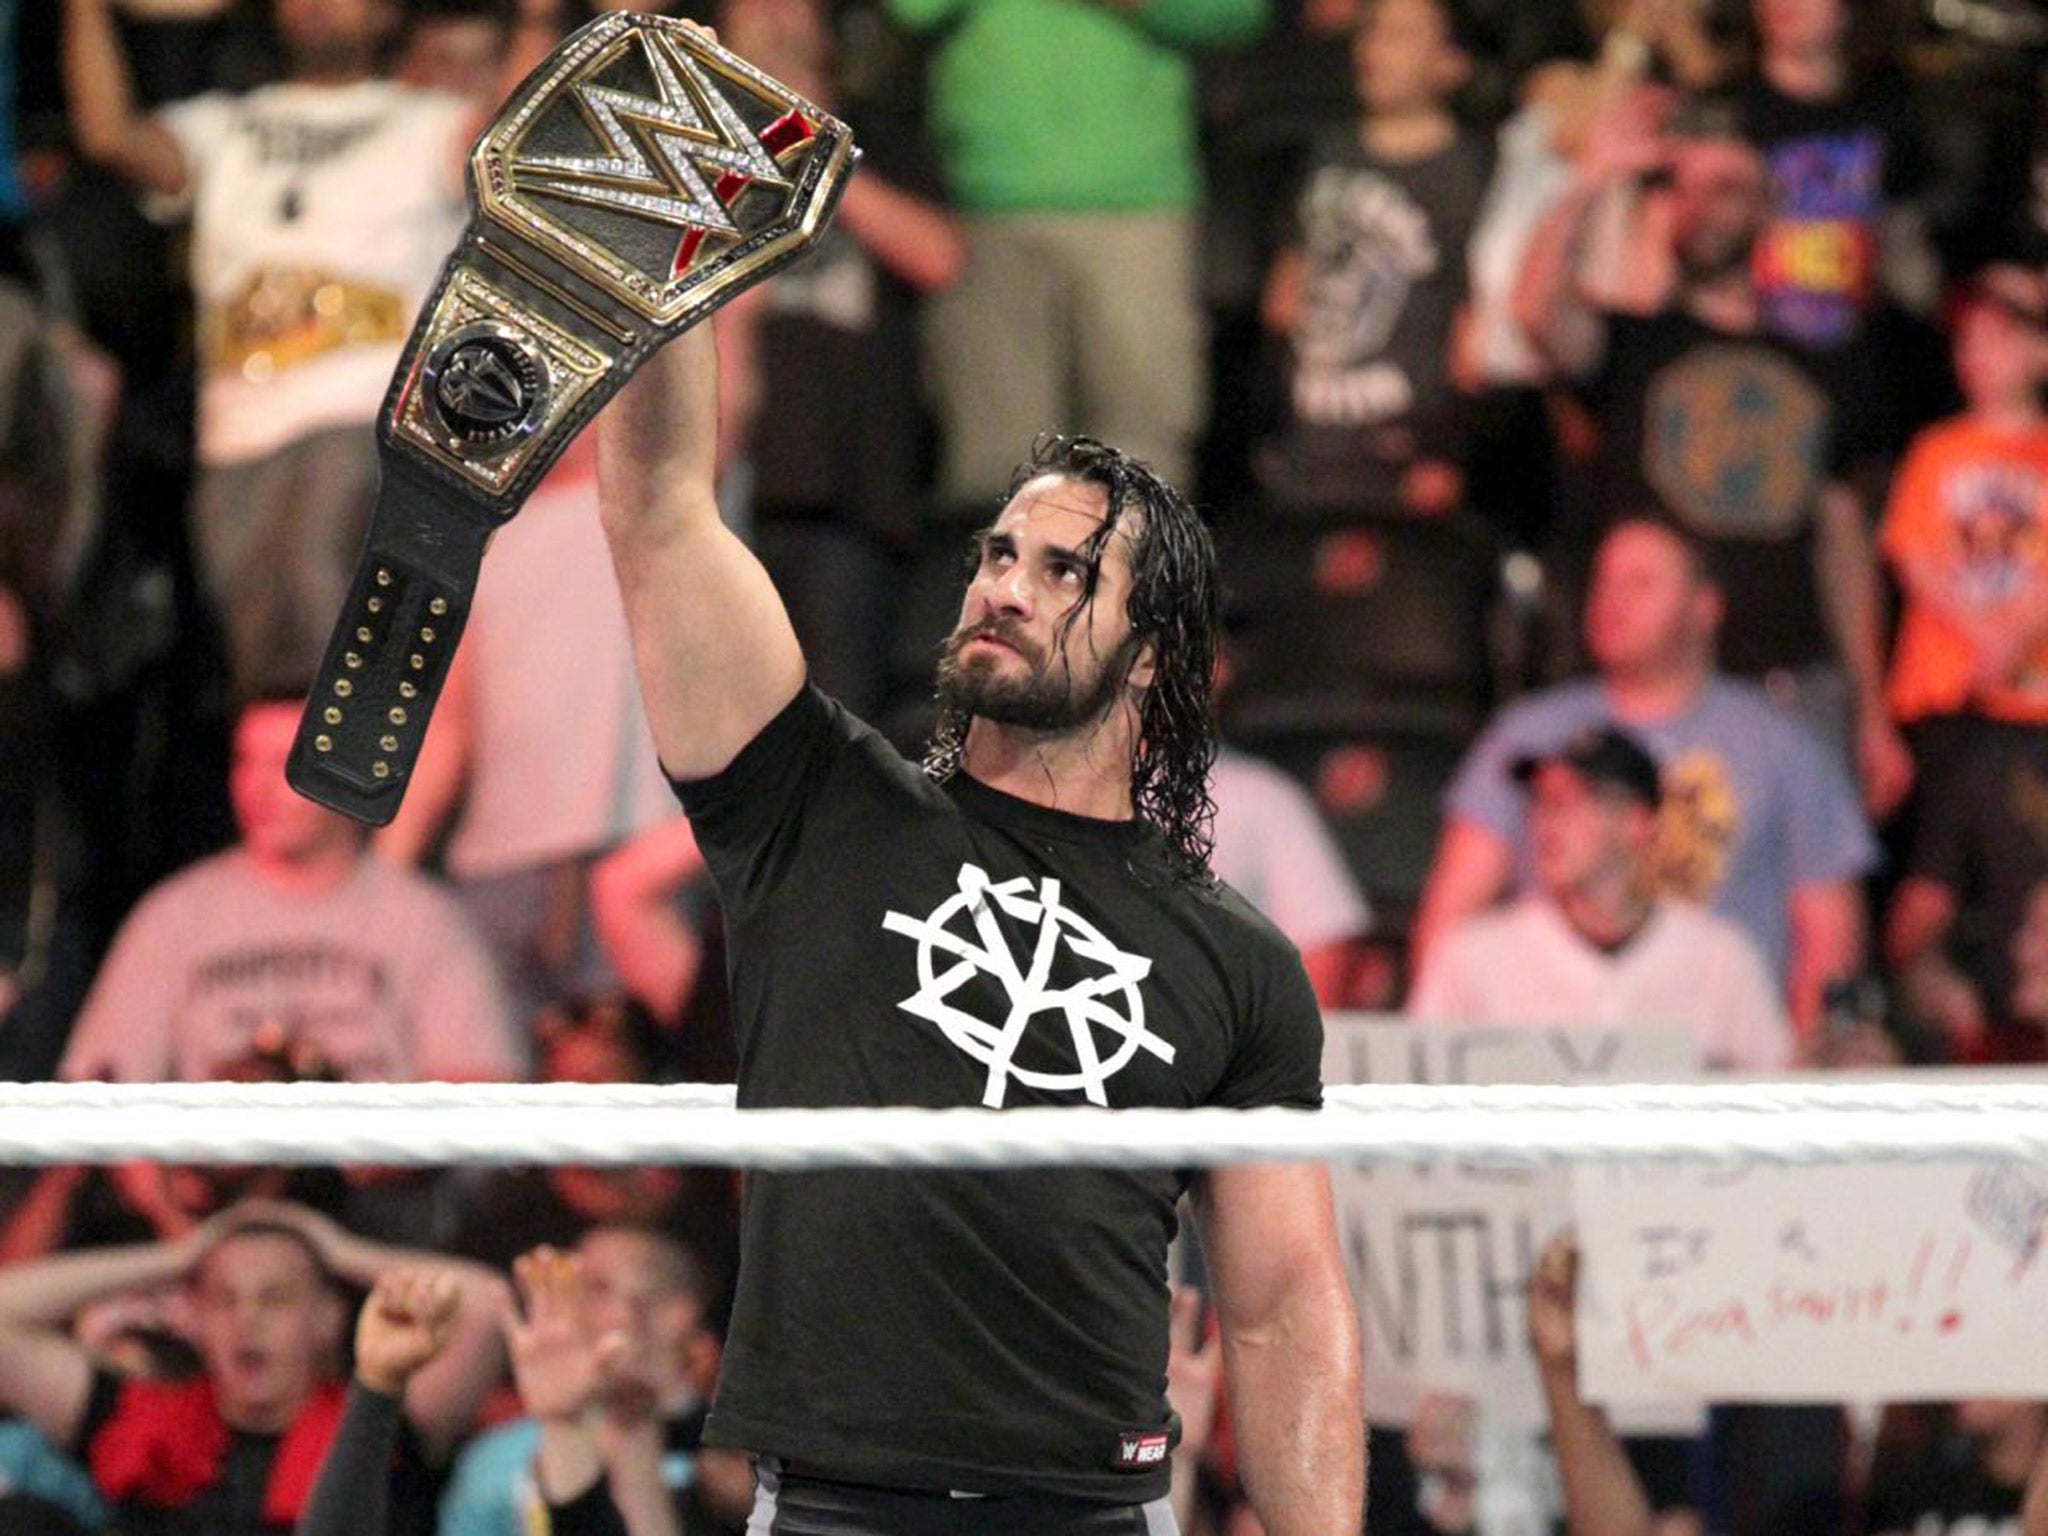 Seth Rollins signals his return to the WWE